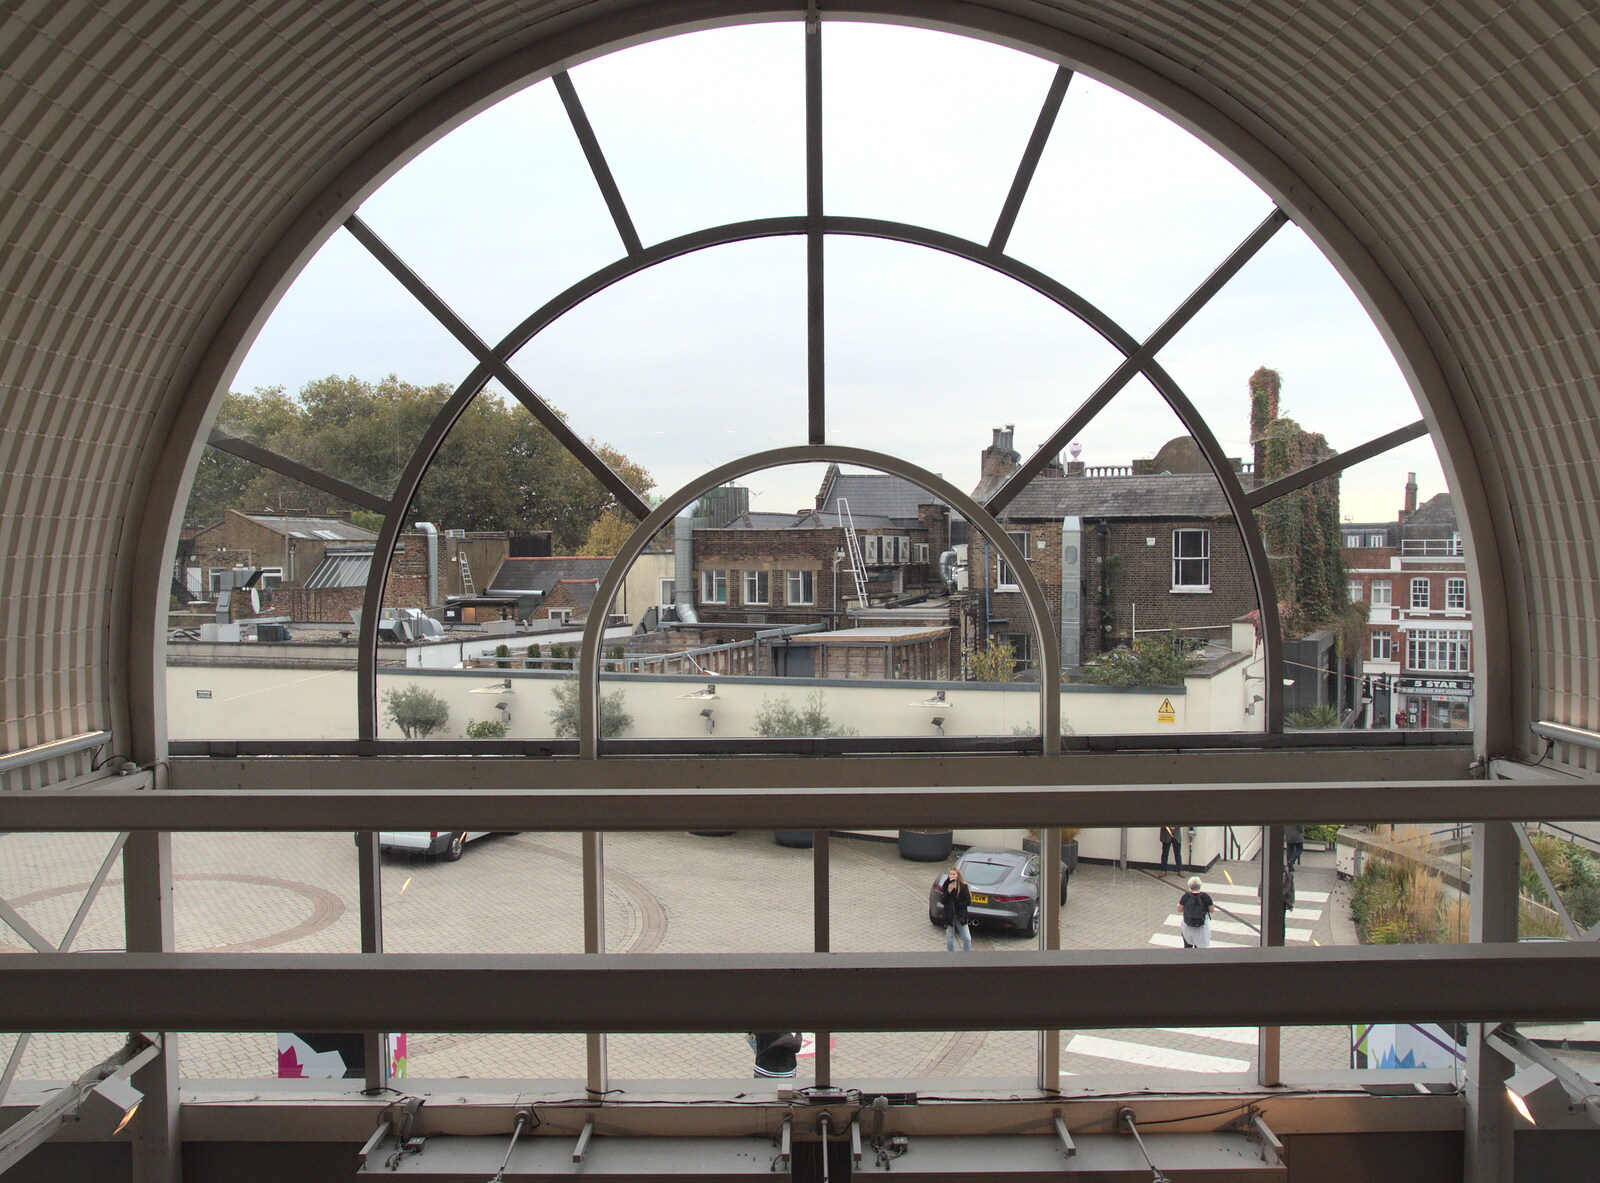 A view from a window from Droidcon 2016, Islington, London - 27th October 2016